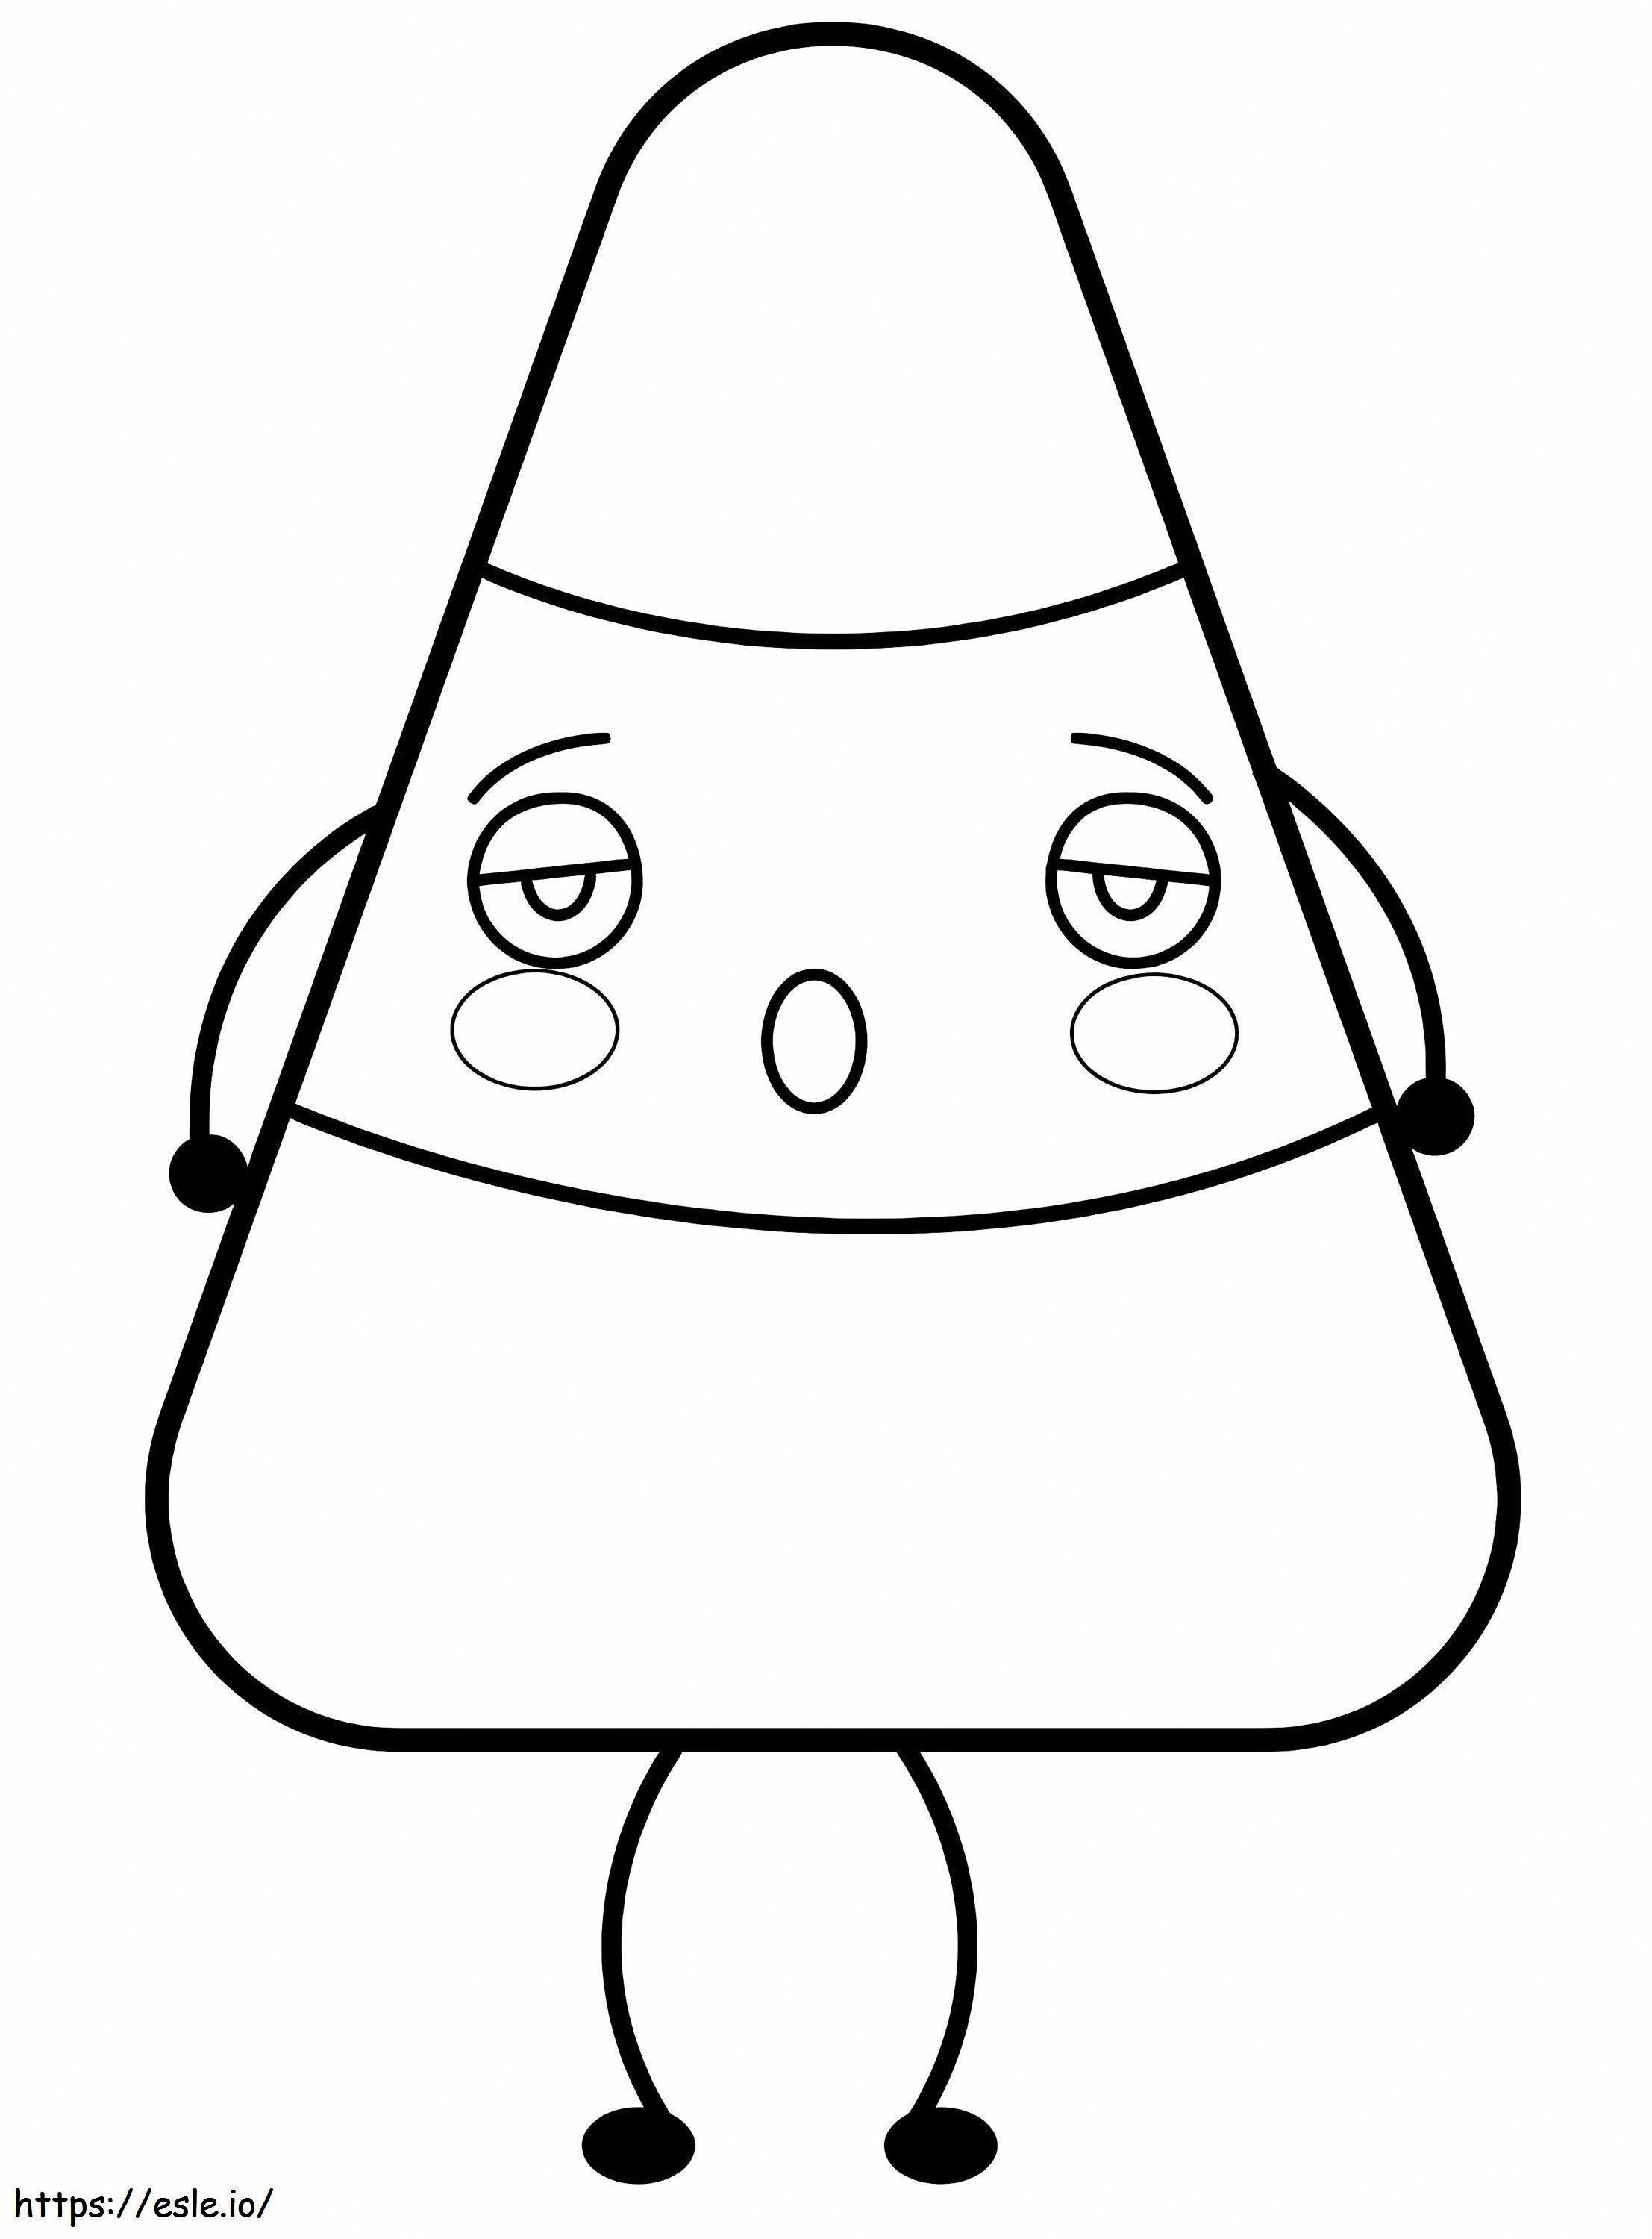 Sleepy Candy Corn coloring page